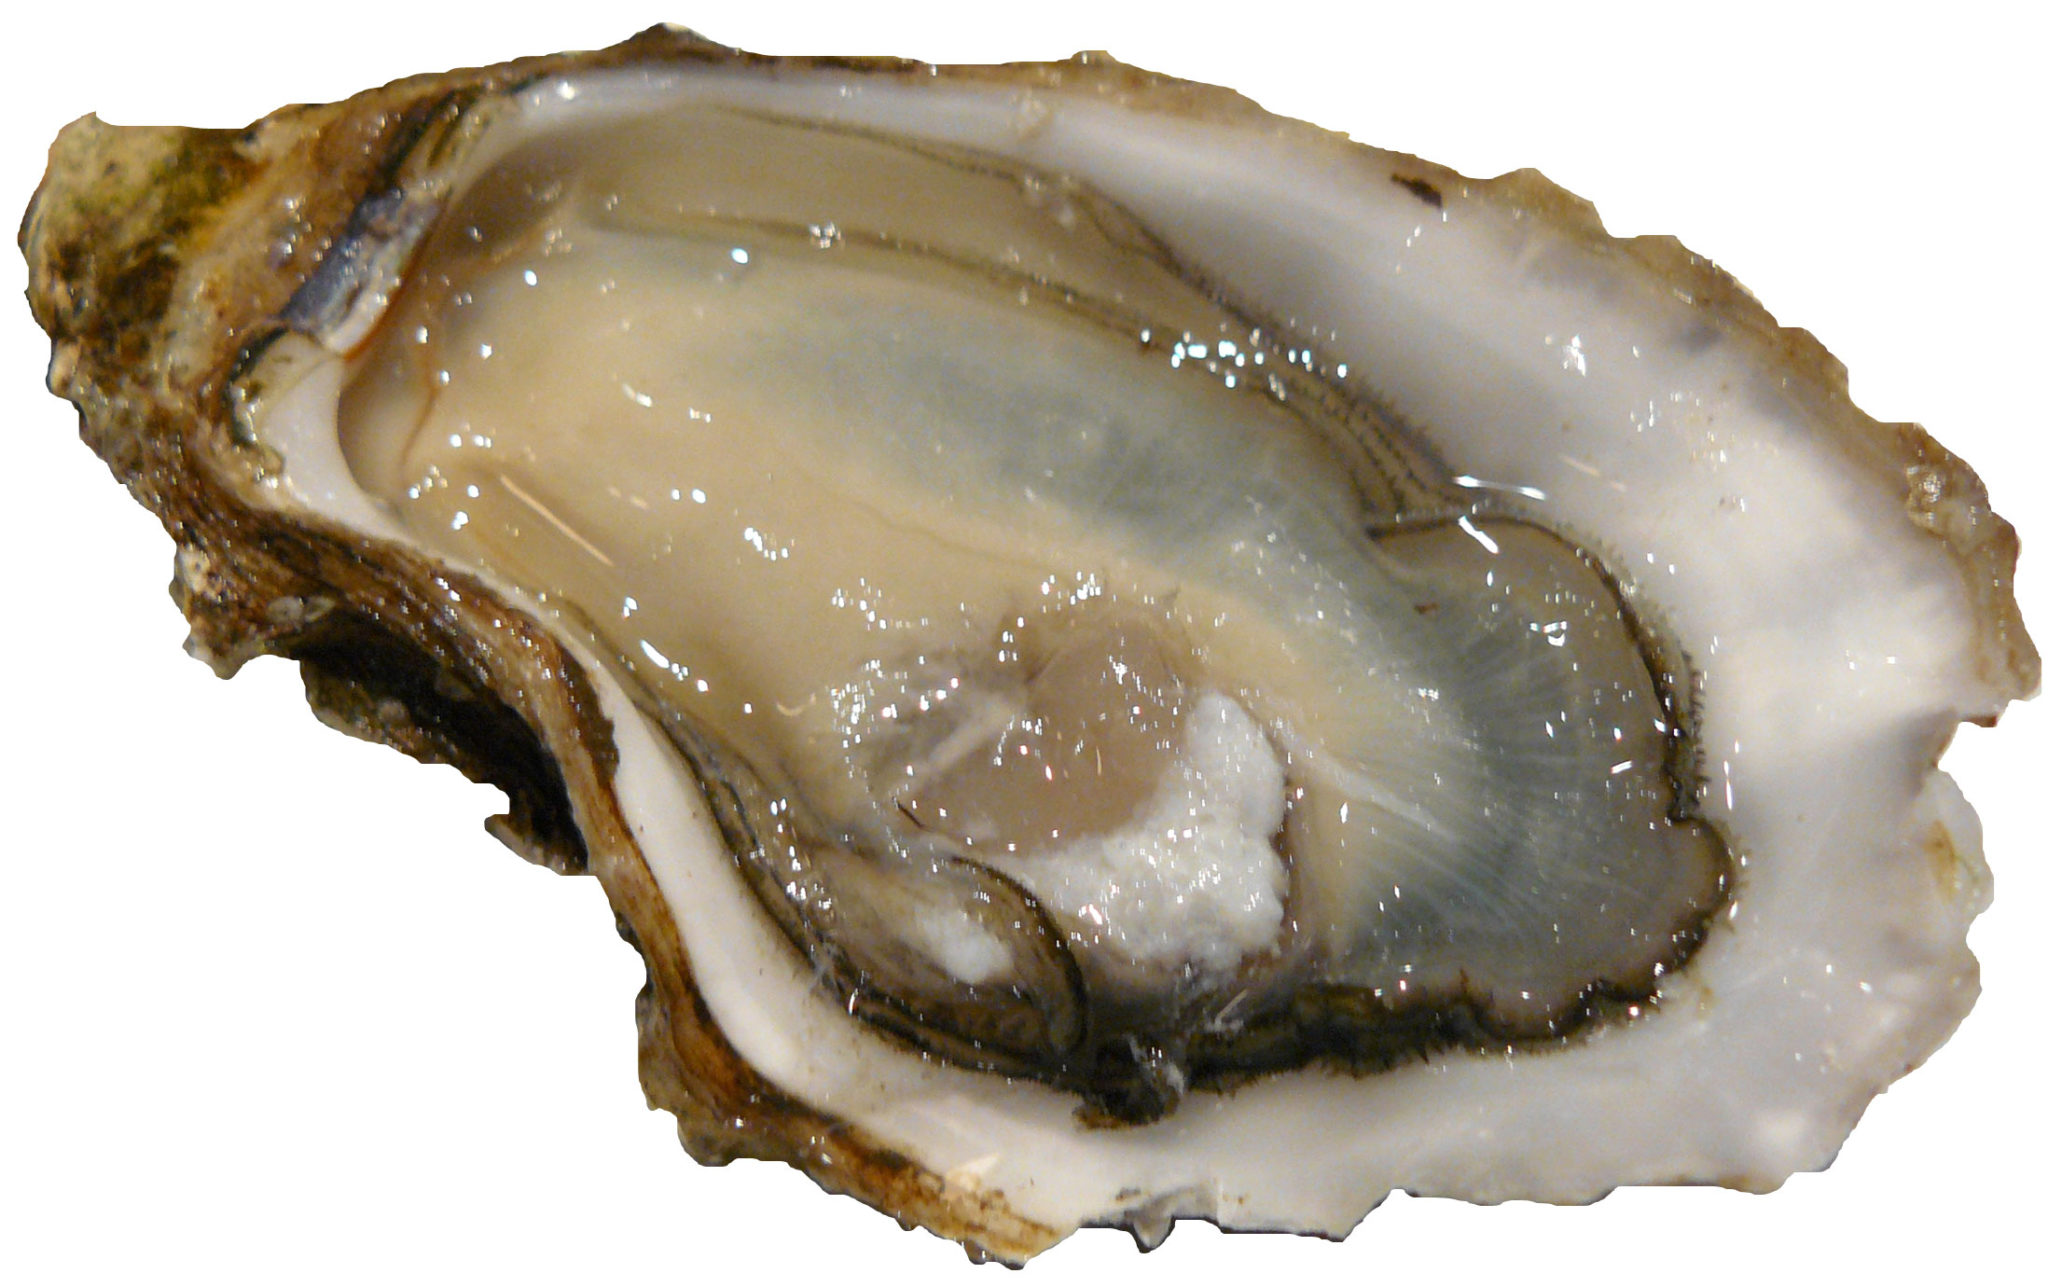 In Canada Stellar Bay Shellfish Oysters were recalled due to norovirus